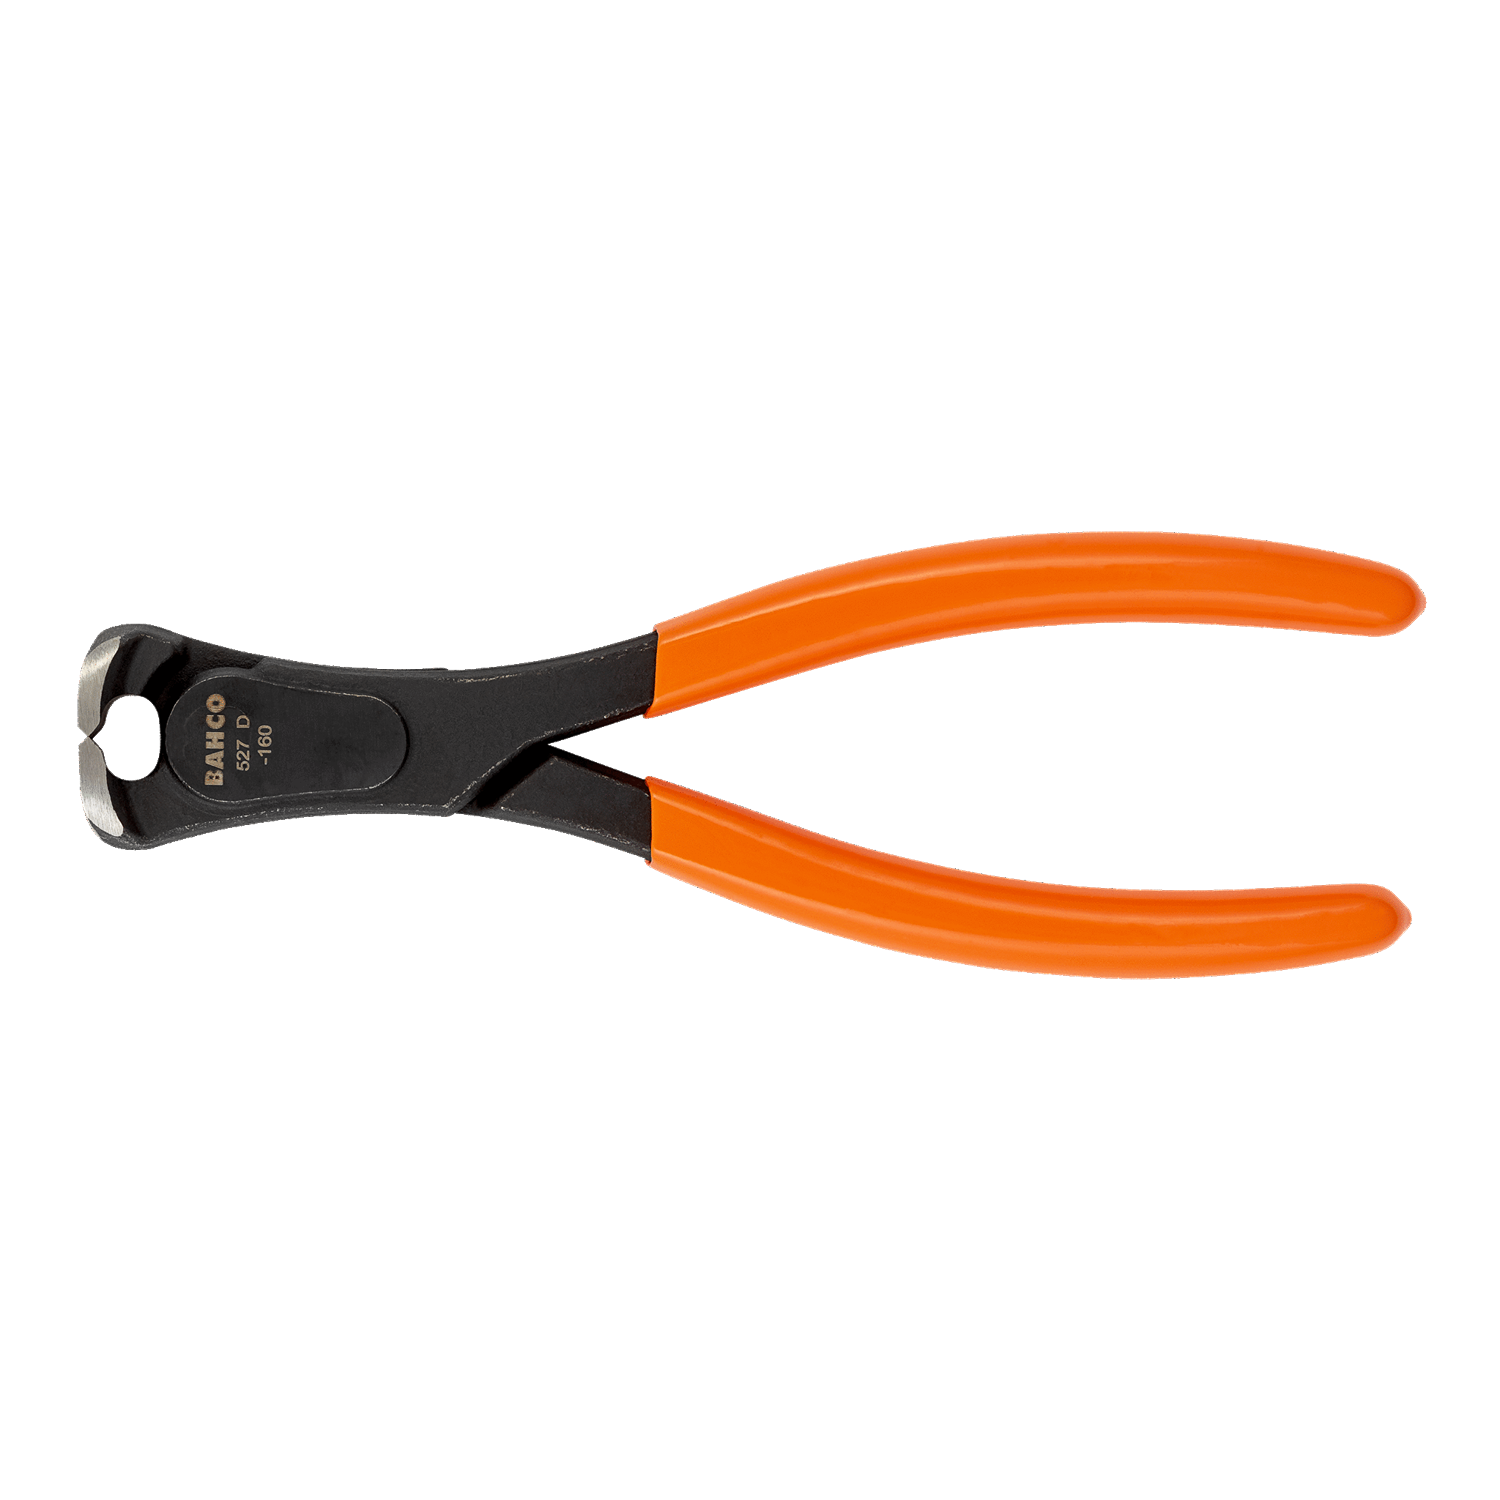 BAHCO 527D End Cutting Plier with PVC Handles - Premium Cutting Plier from BAHCO - Shop now at Yew Aik.